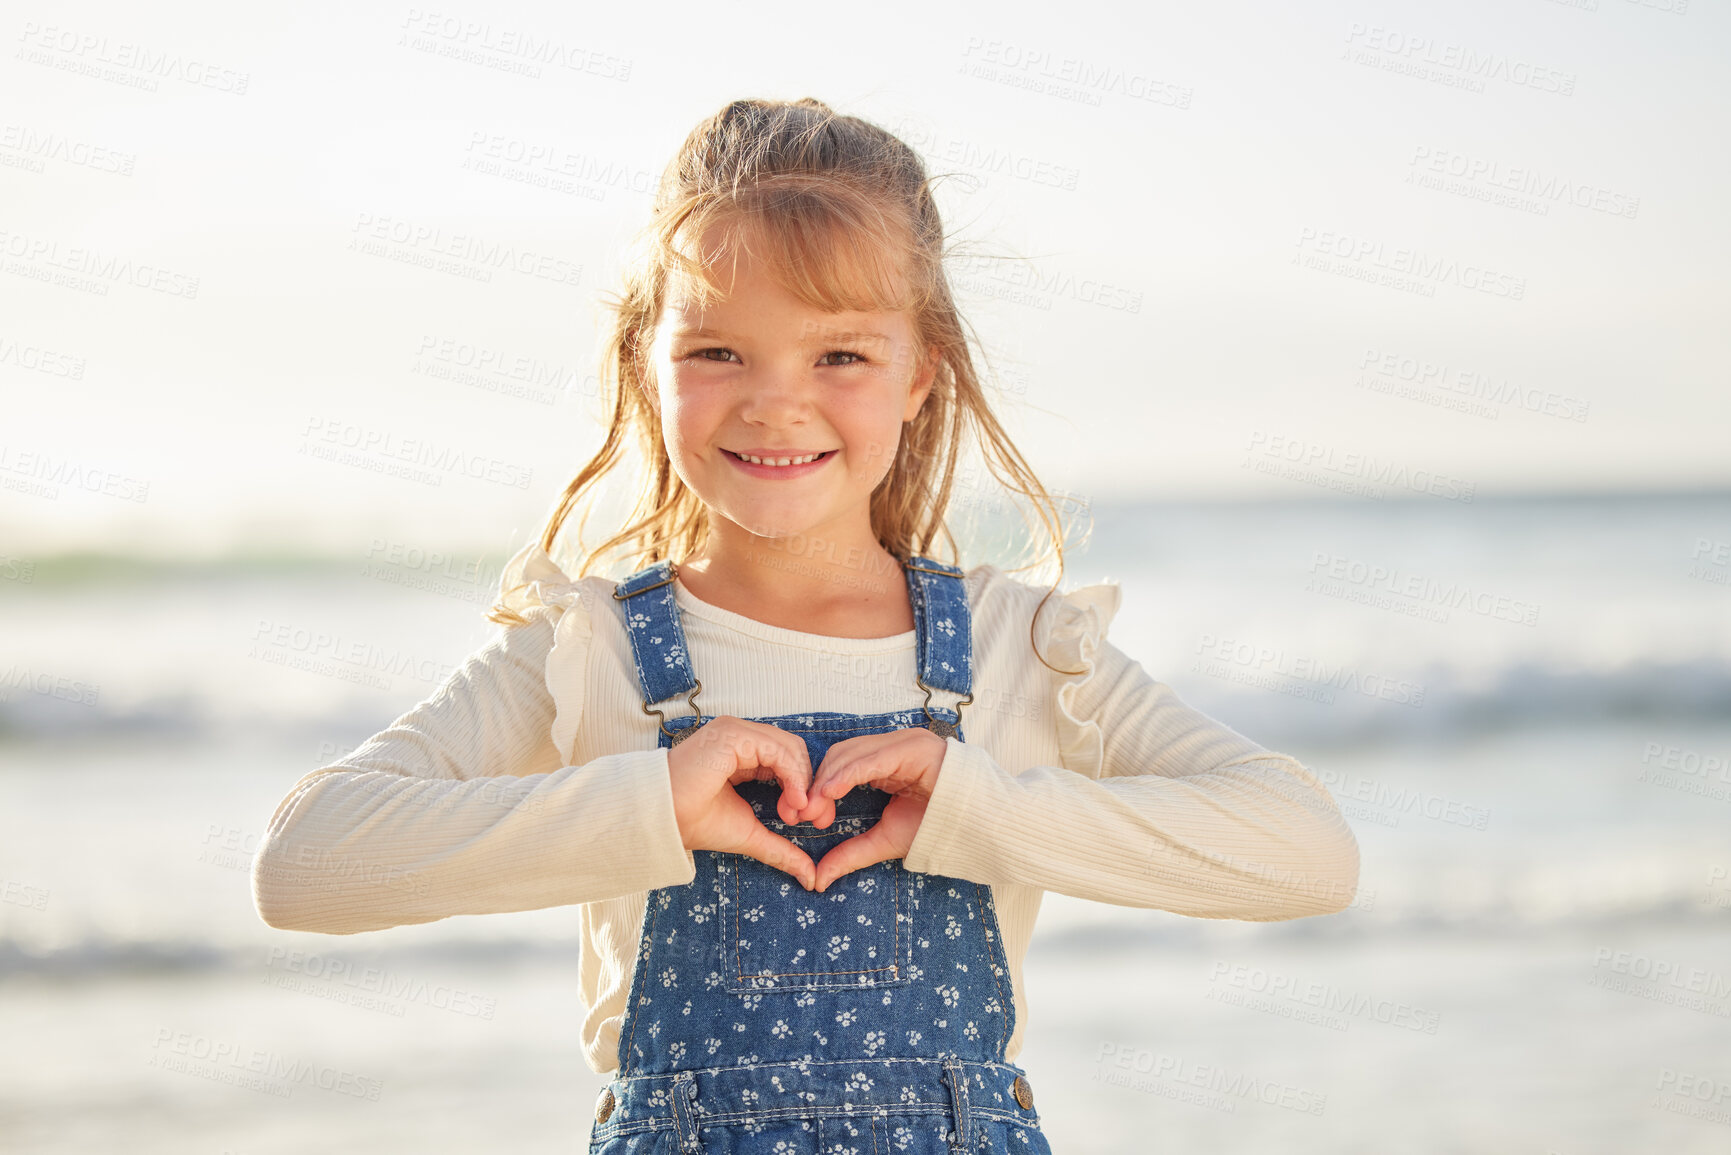 Buy stock photo Blonde caucasian little girl enjoying a day at the beach, making a heart shape gesture with her hands. Small child loving her beach holiday. Happy kid smiling and posing on the beach.